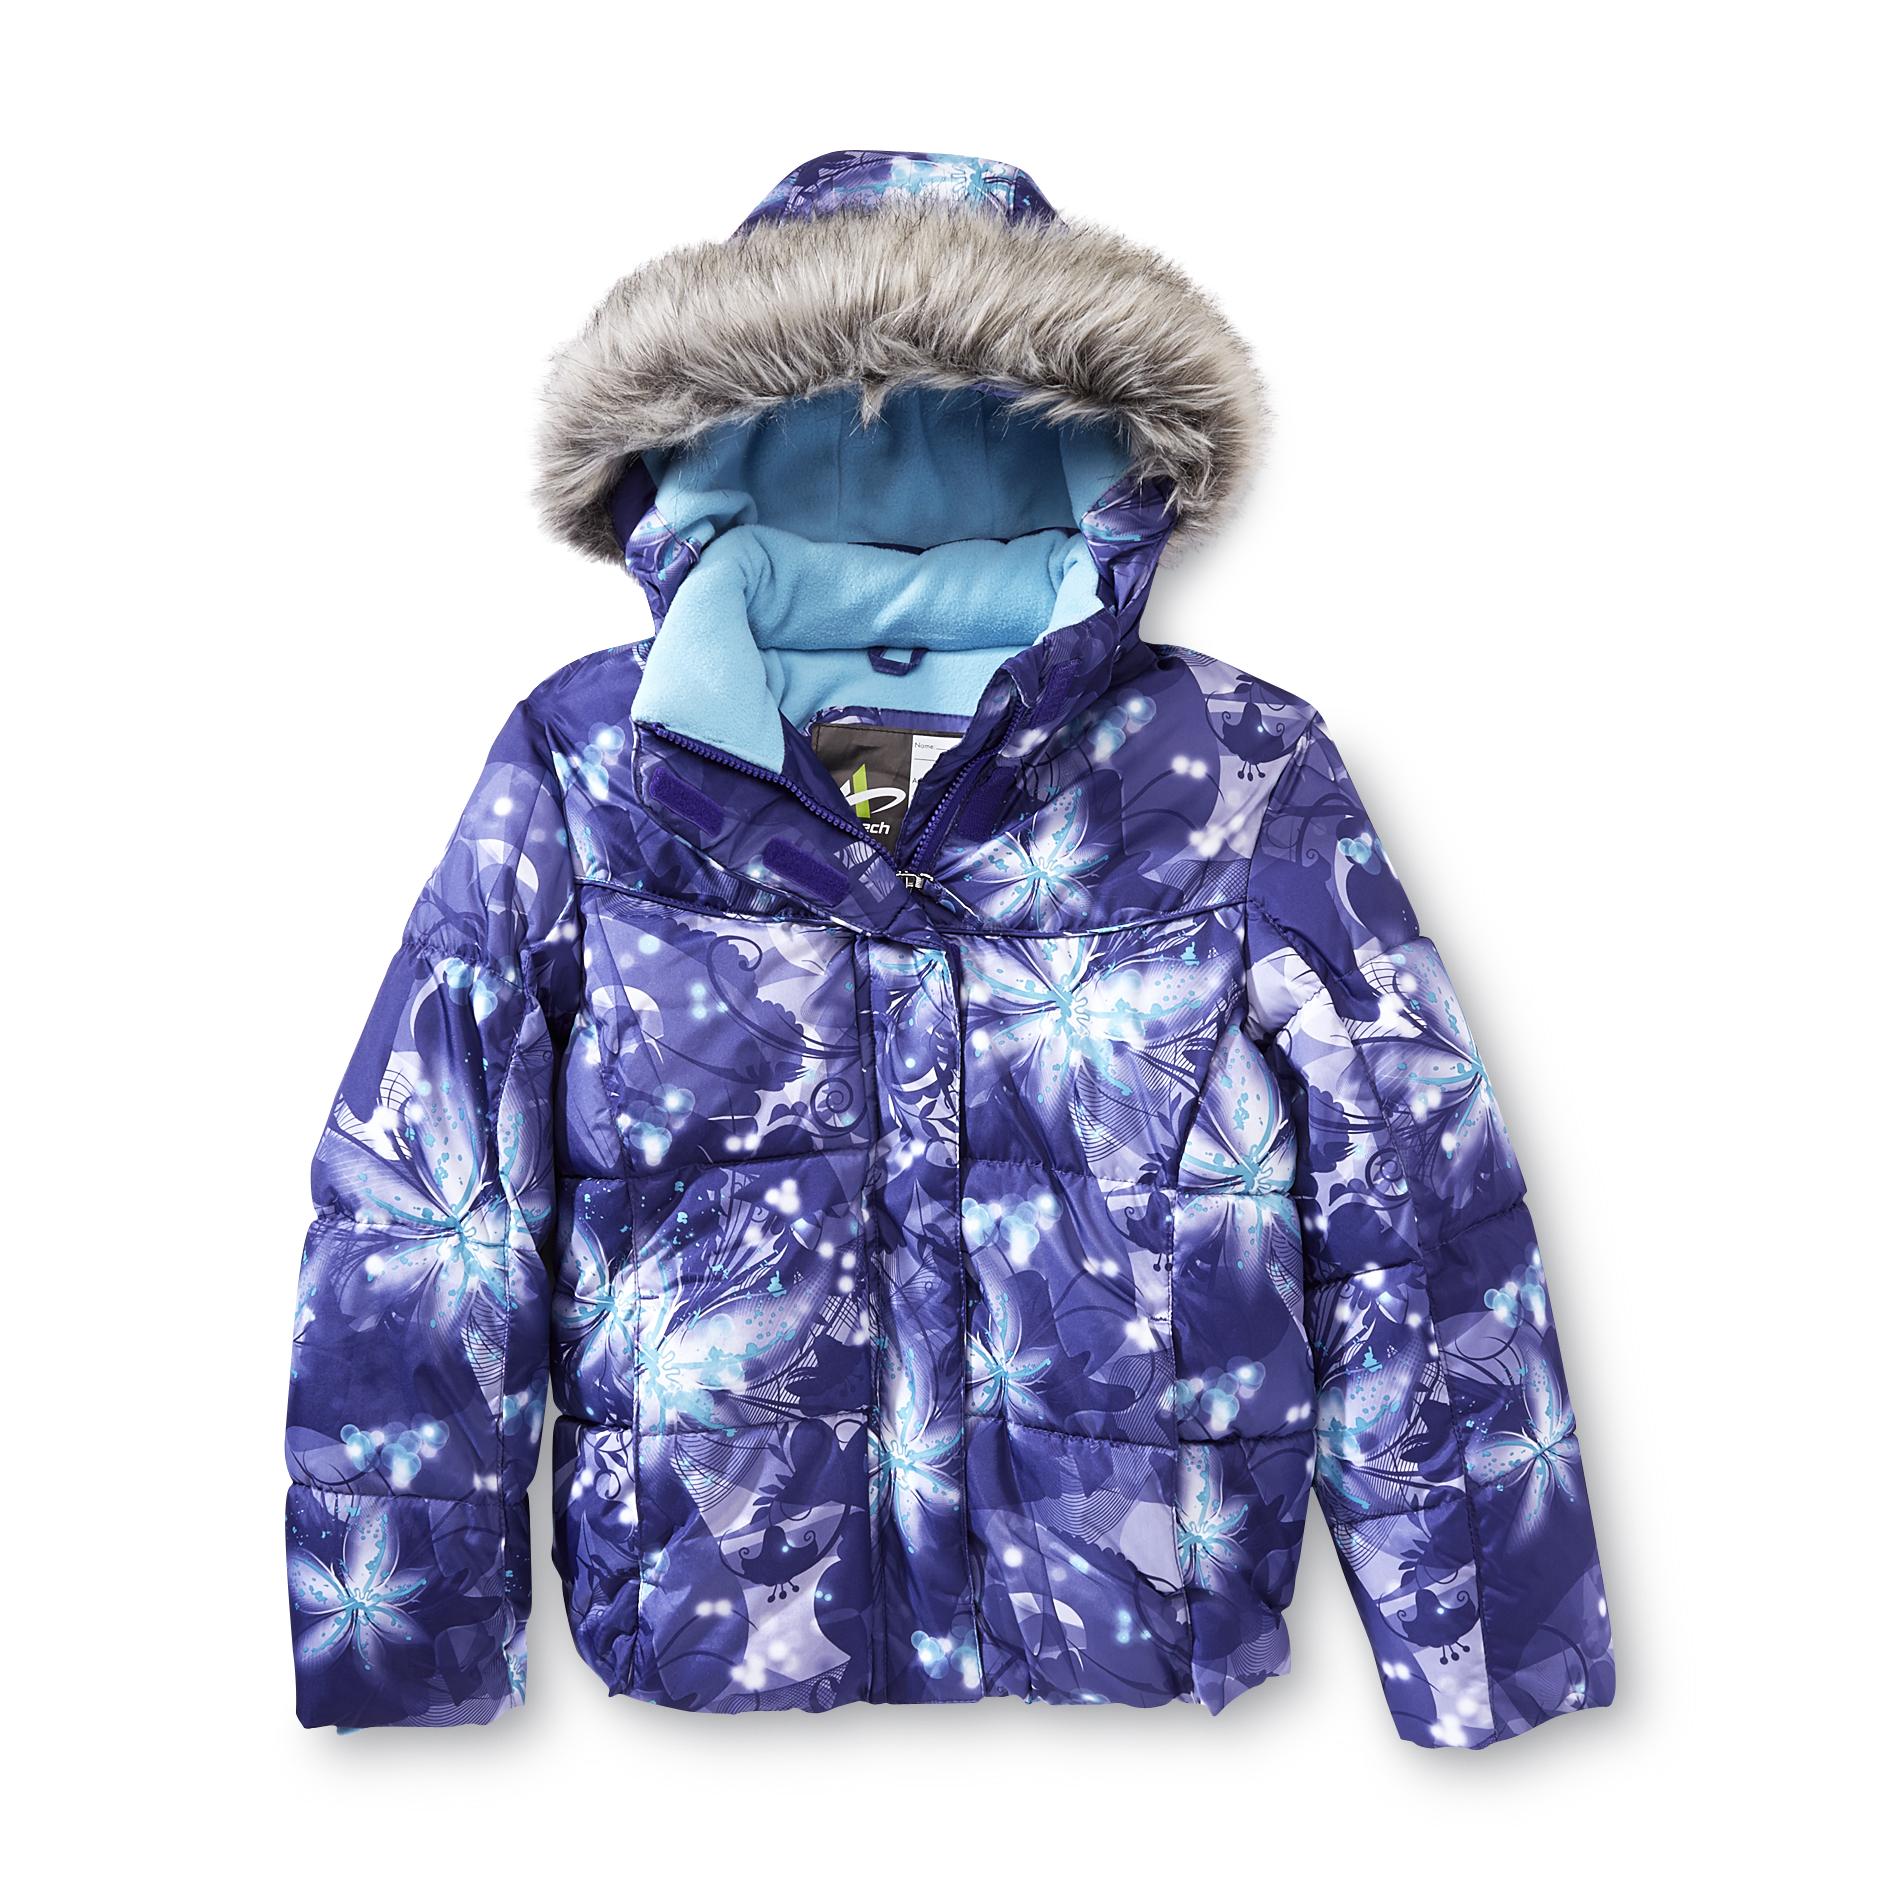 Athletech Girl's Hooded Puffer Jacket - Abstract Floral